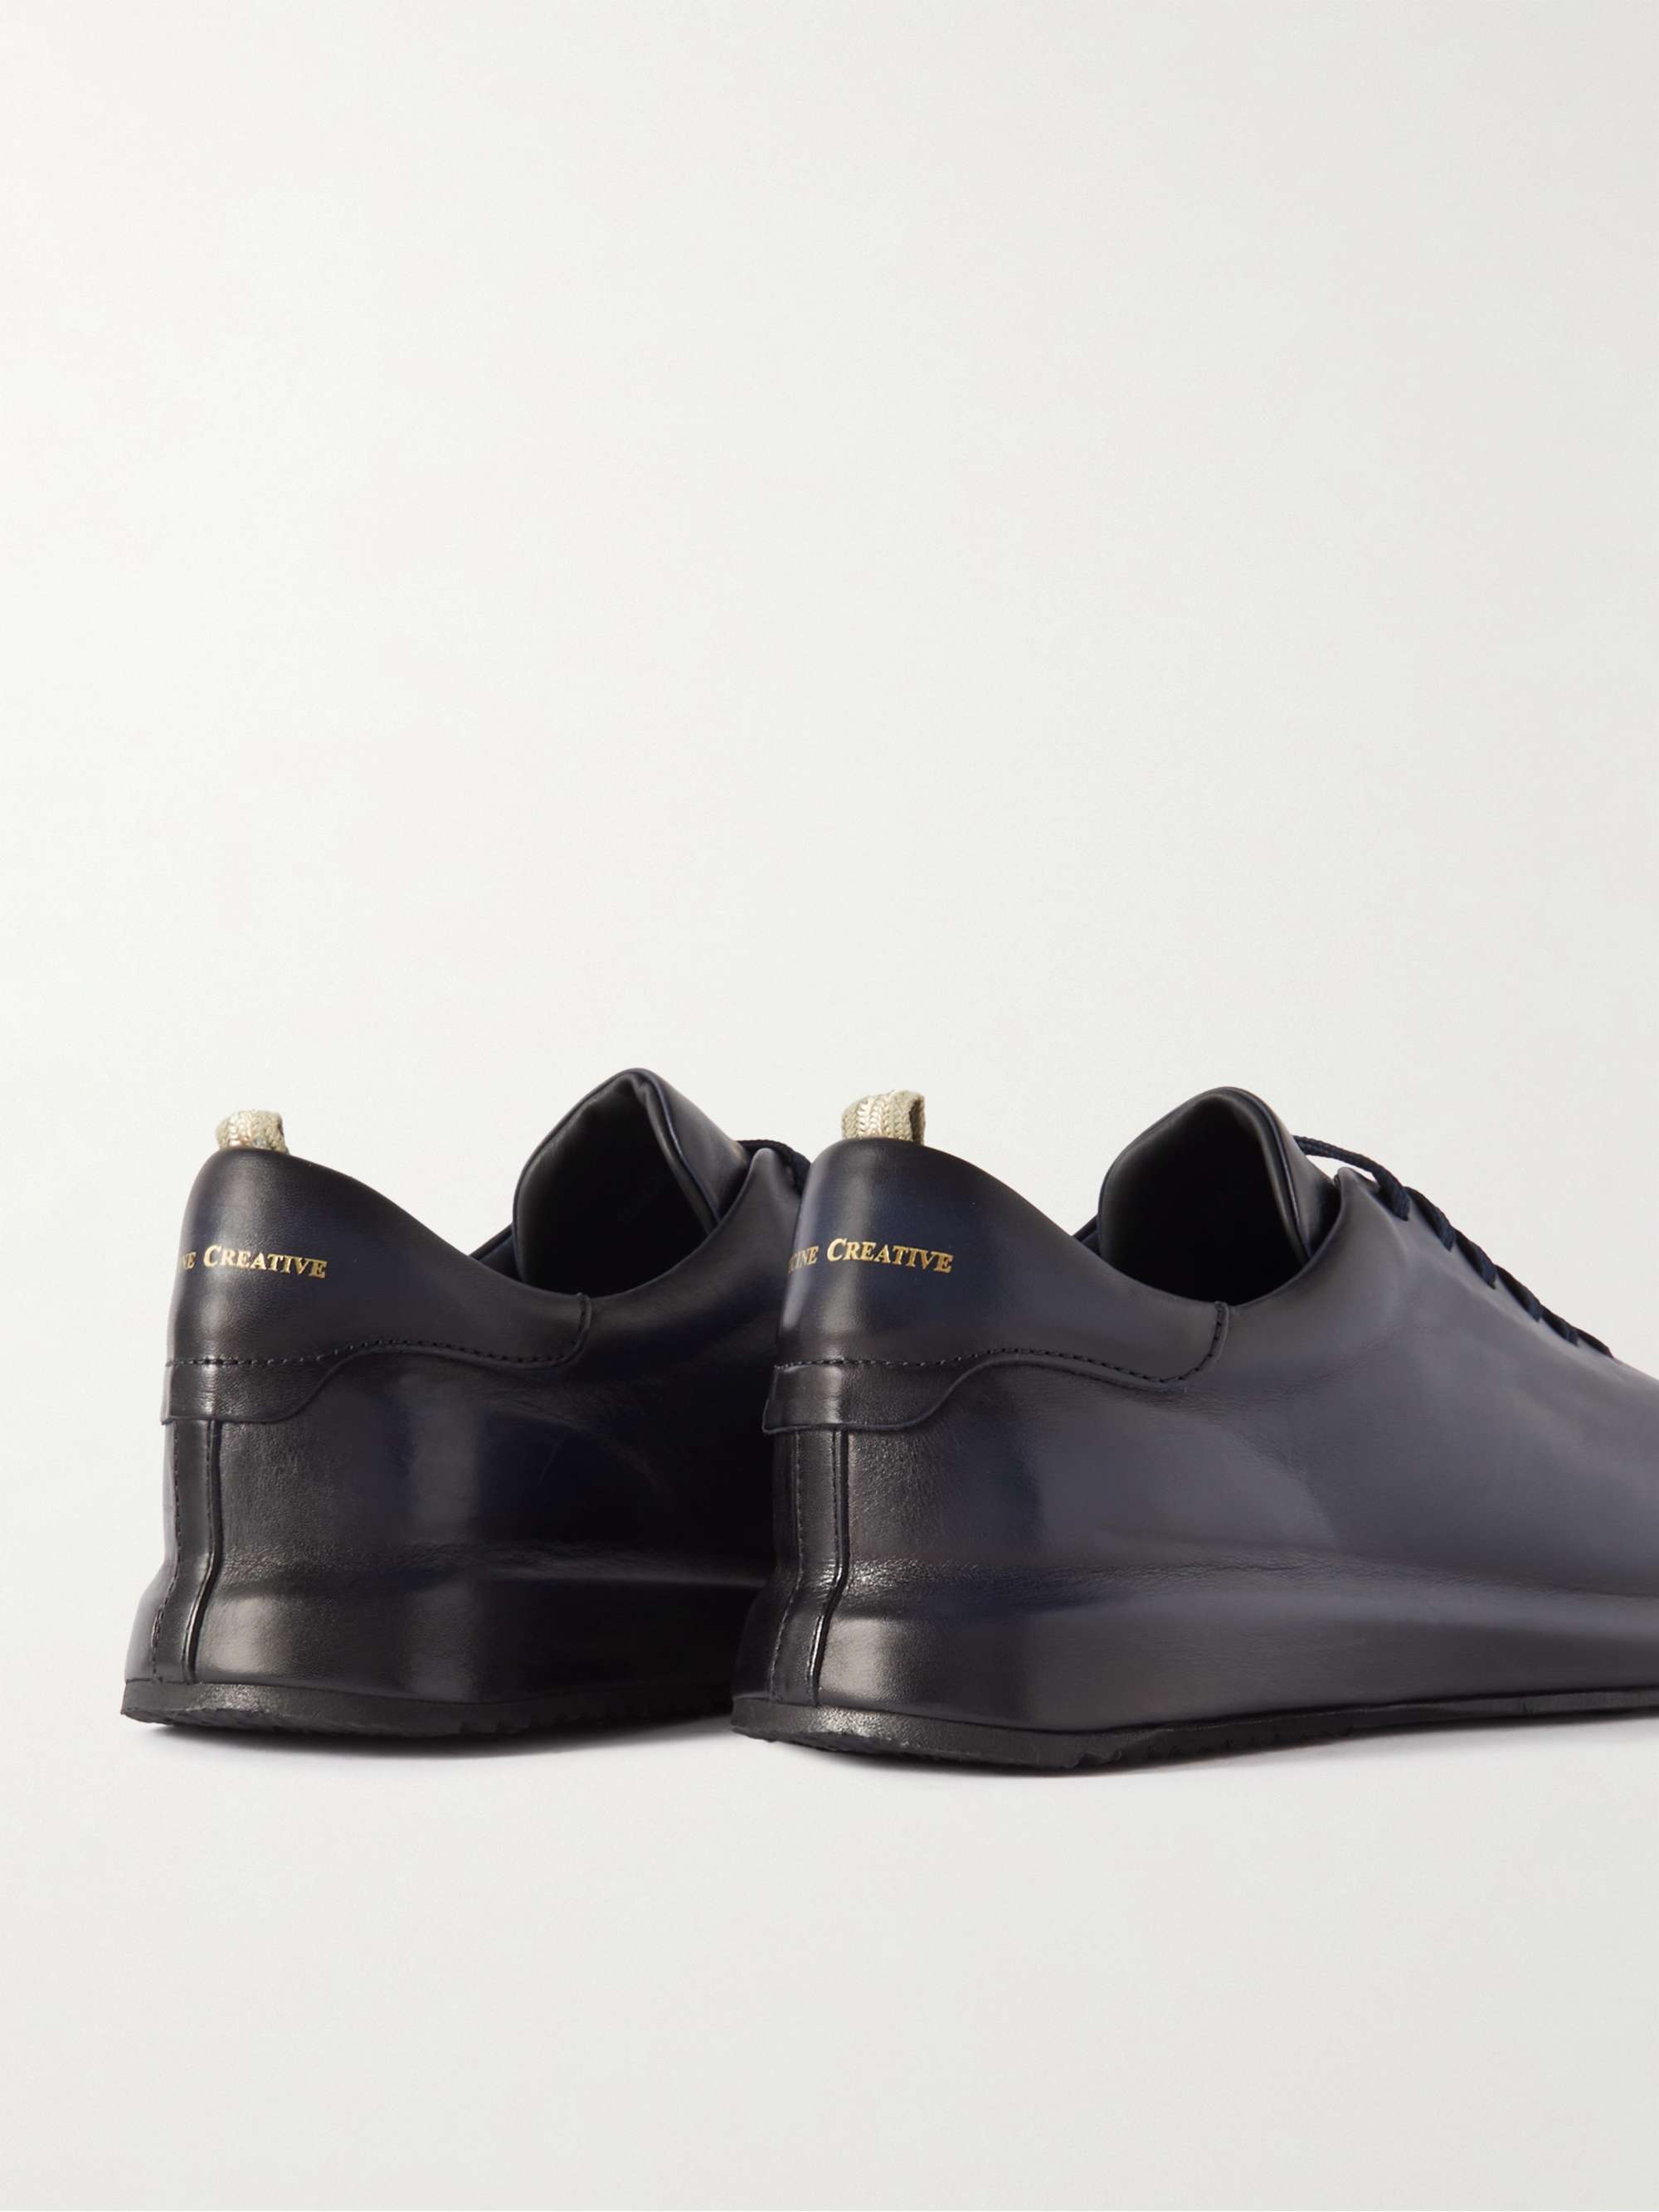 OFFICINE CREATIVE Race 017 Leather Sneakers for Men | MR PORTER